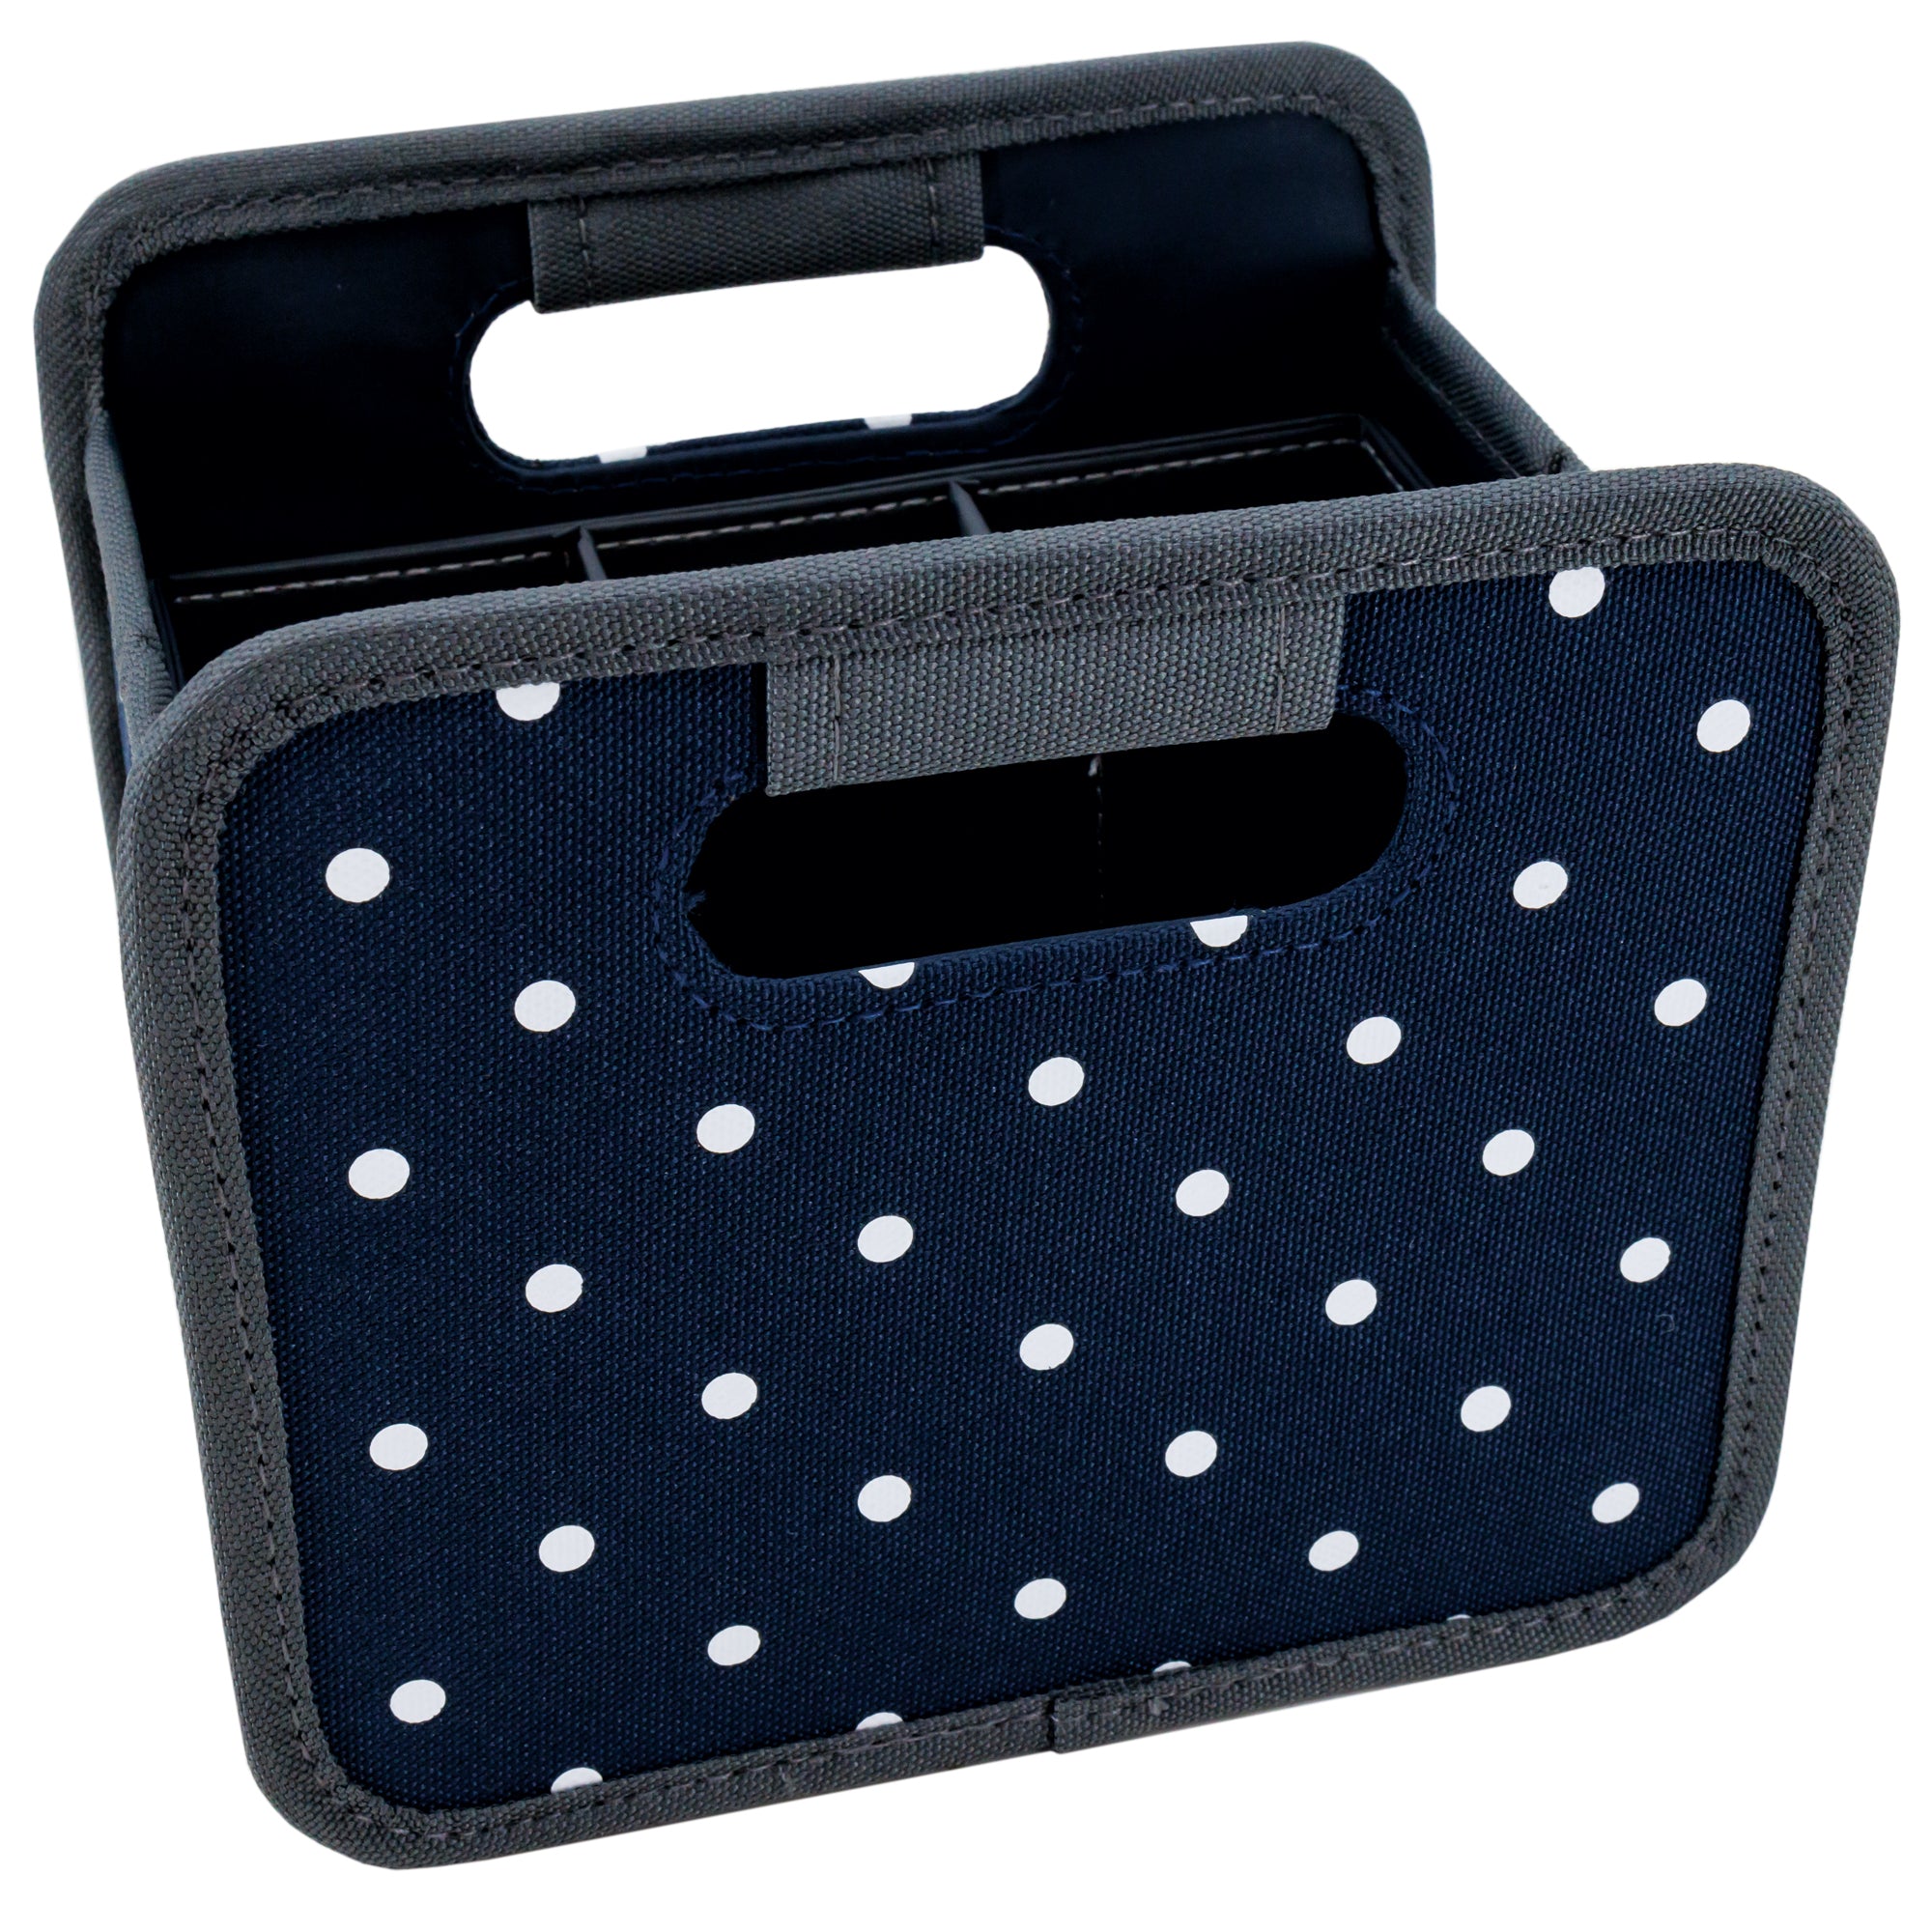 Navy blue with white polka dots colored Meori storage box with insert.